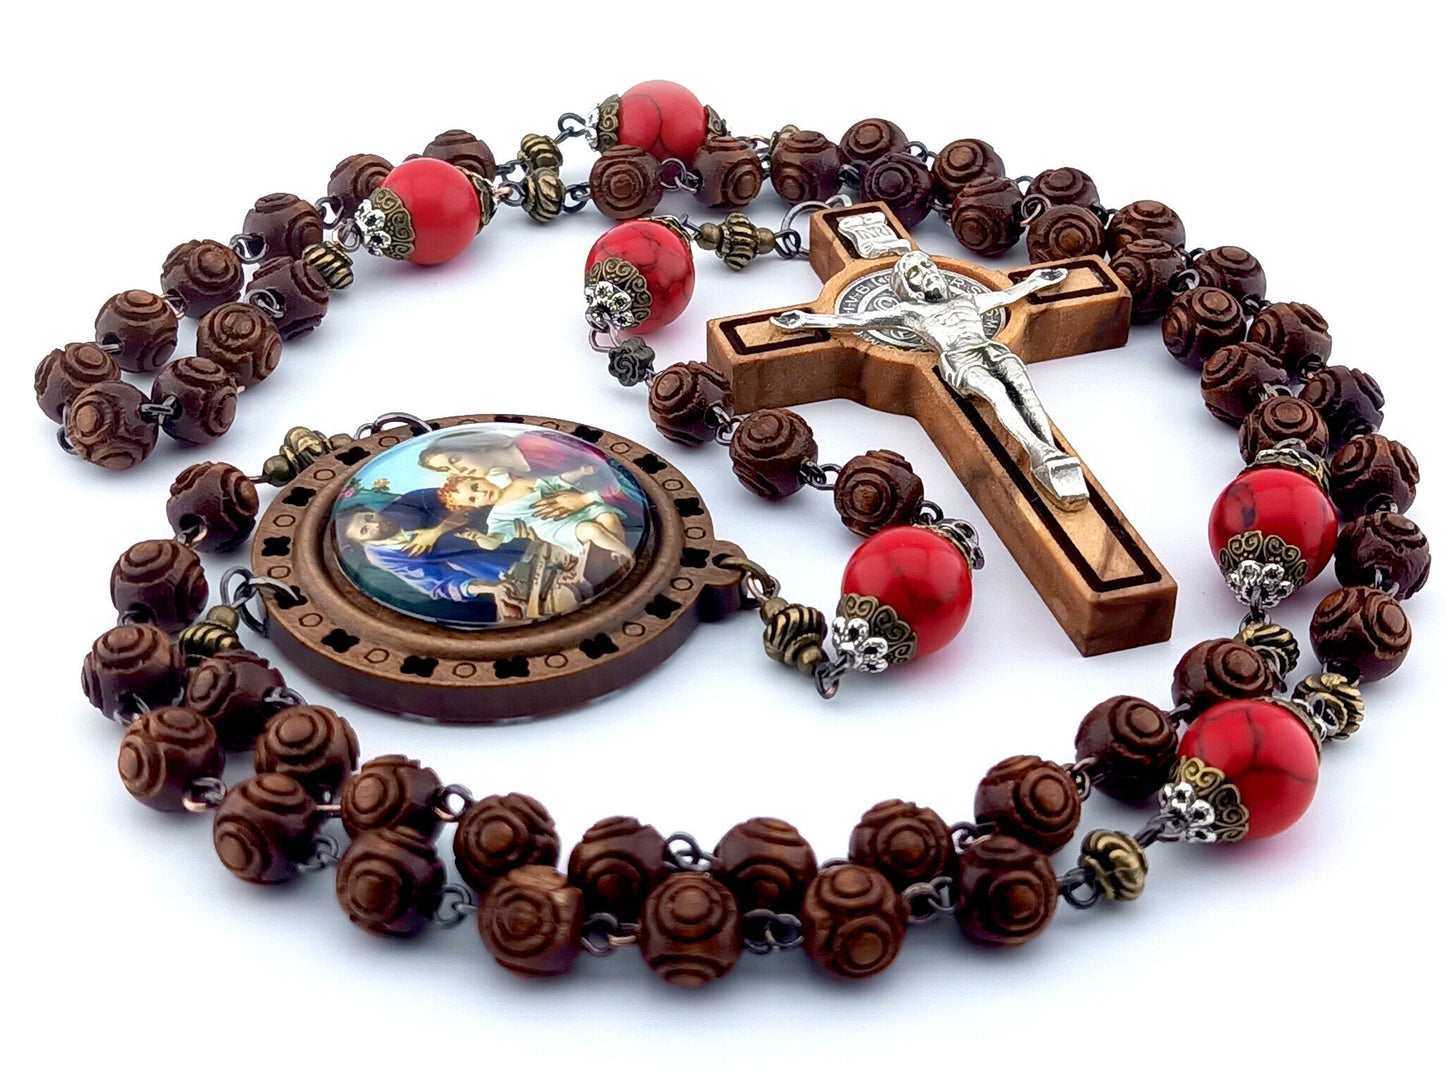 The Nativity unique rosary beads with carved wooden beads, Saint Benedict crucifix, picture centre medal and large red gemstone pater beads.